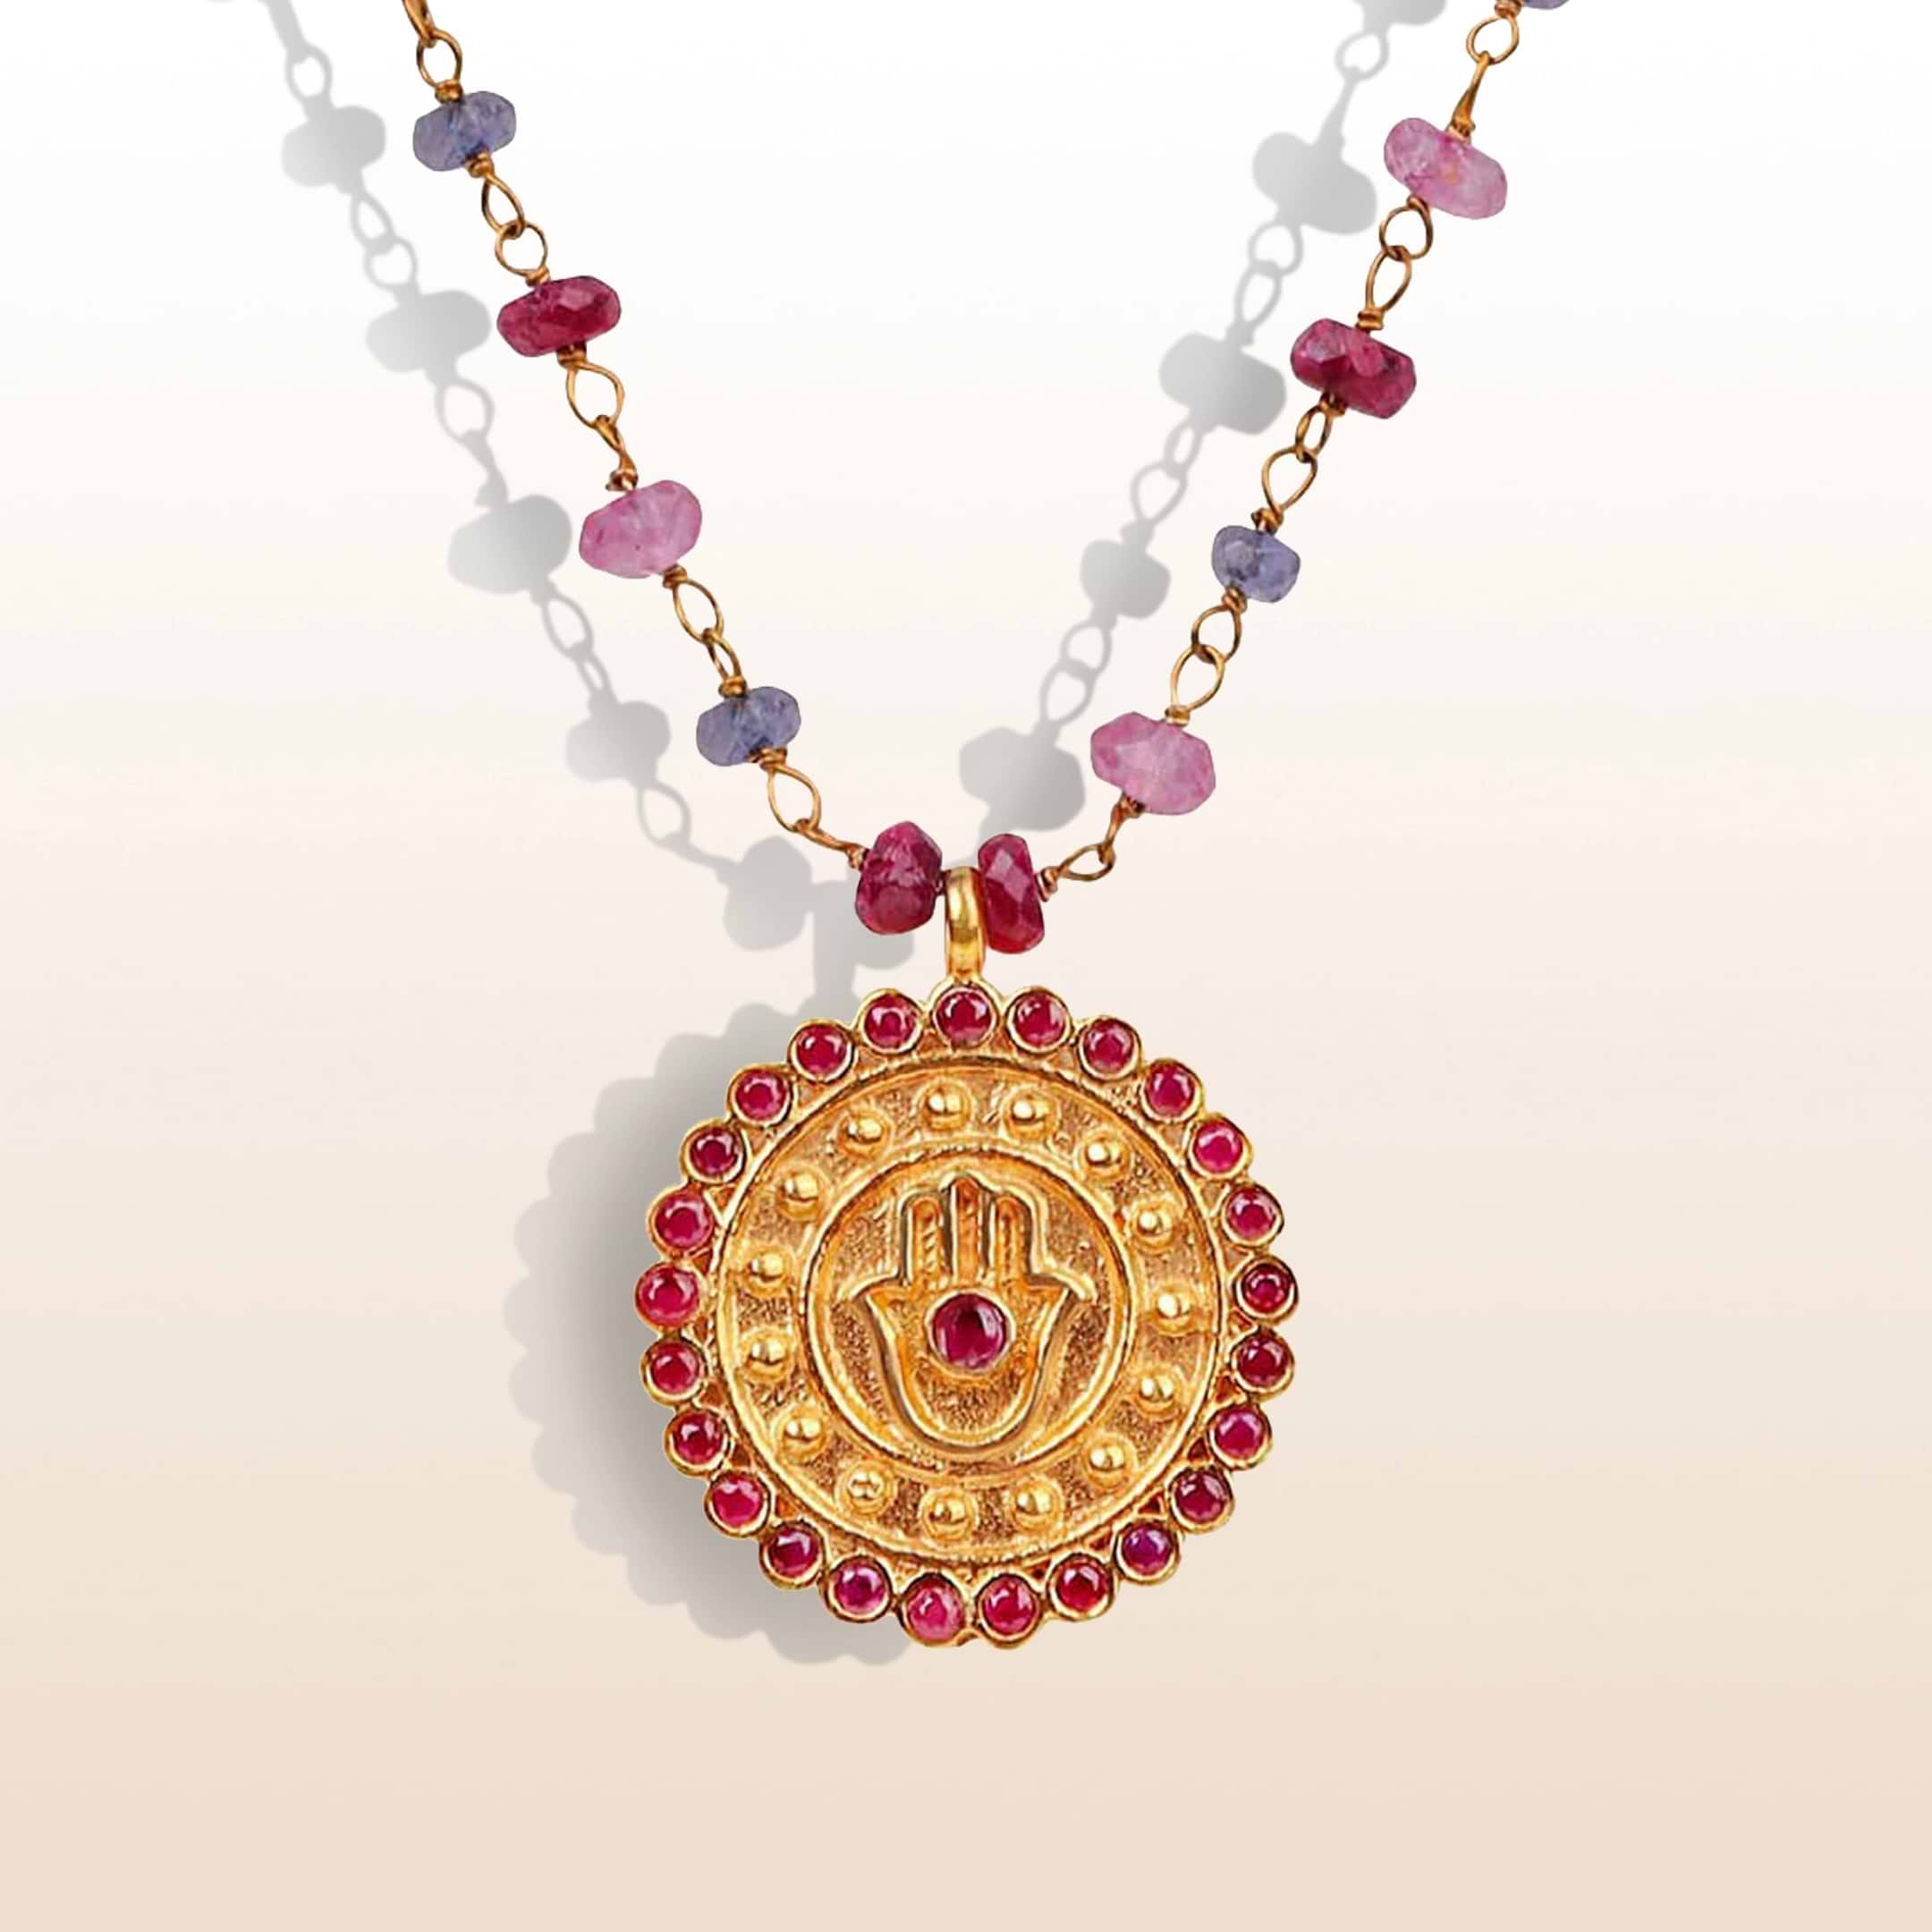 Picture of Lively Appreciation - Ruby Pink Sapphire Iolite Hamsa Medallion Necklace